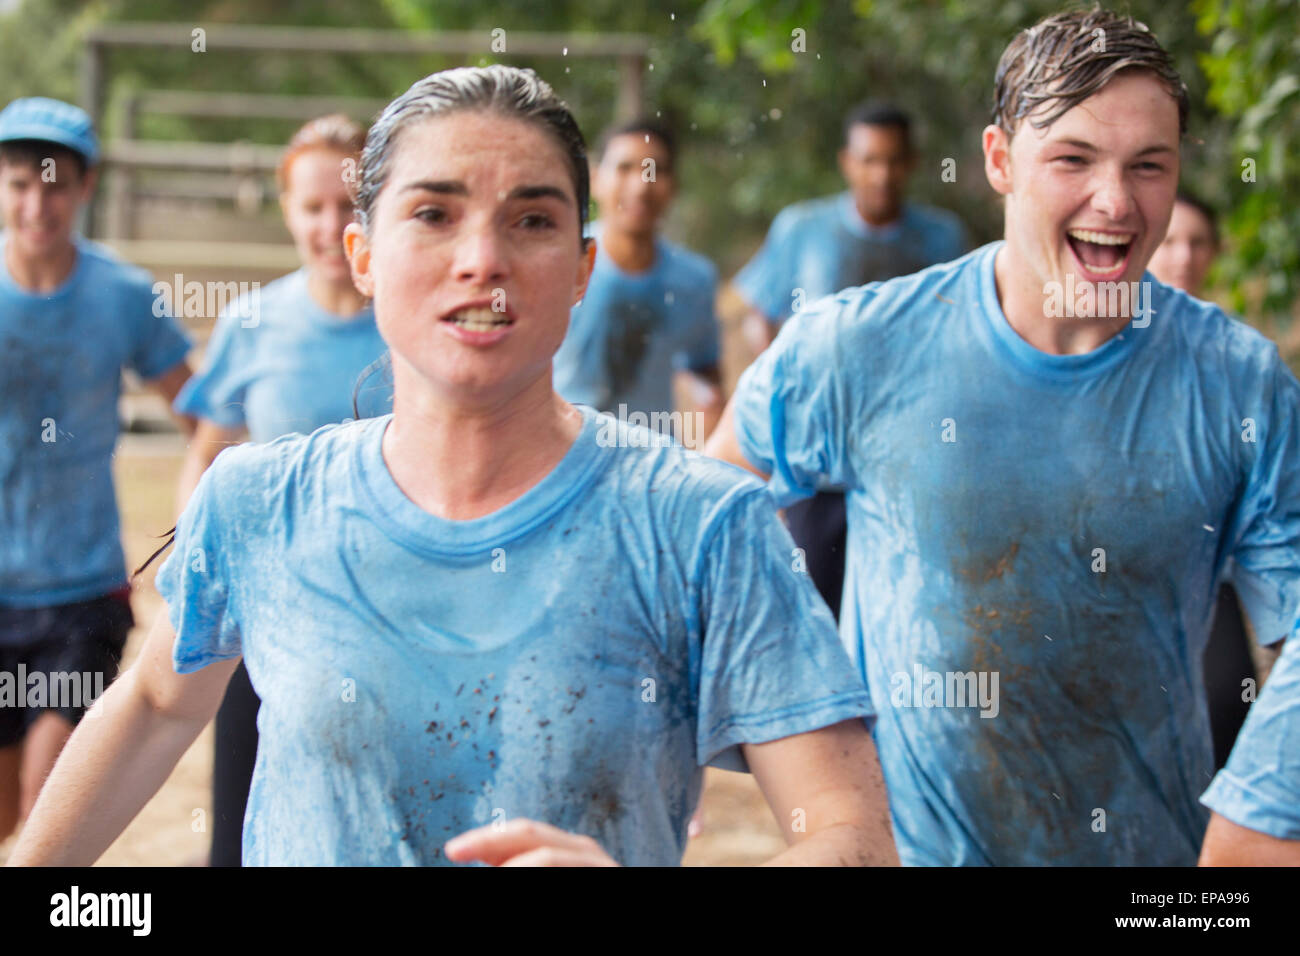 woman running boot camp obstacle course Stock Photo